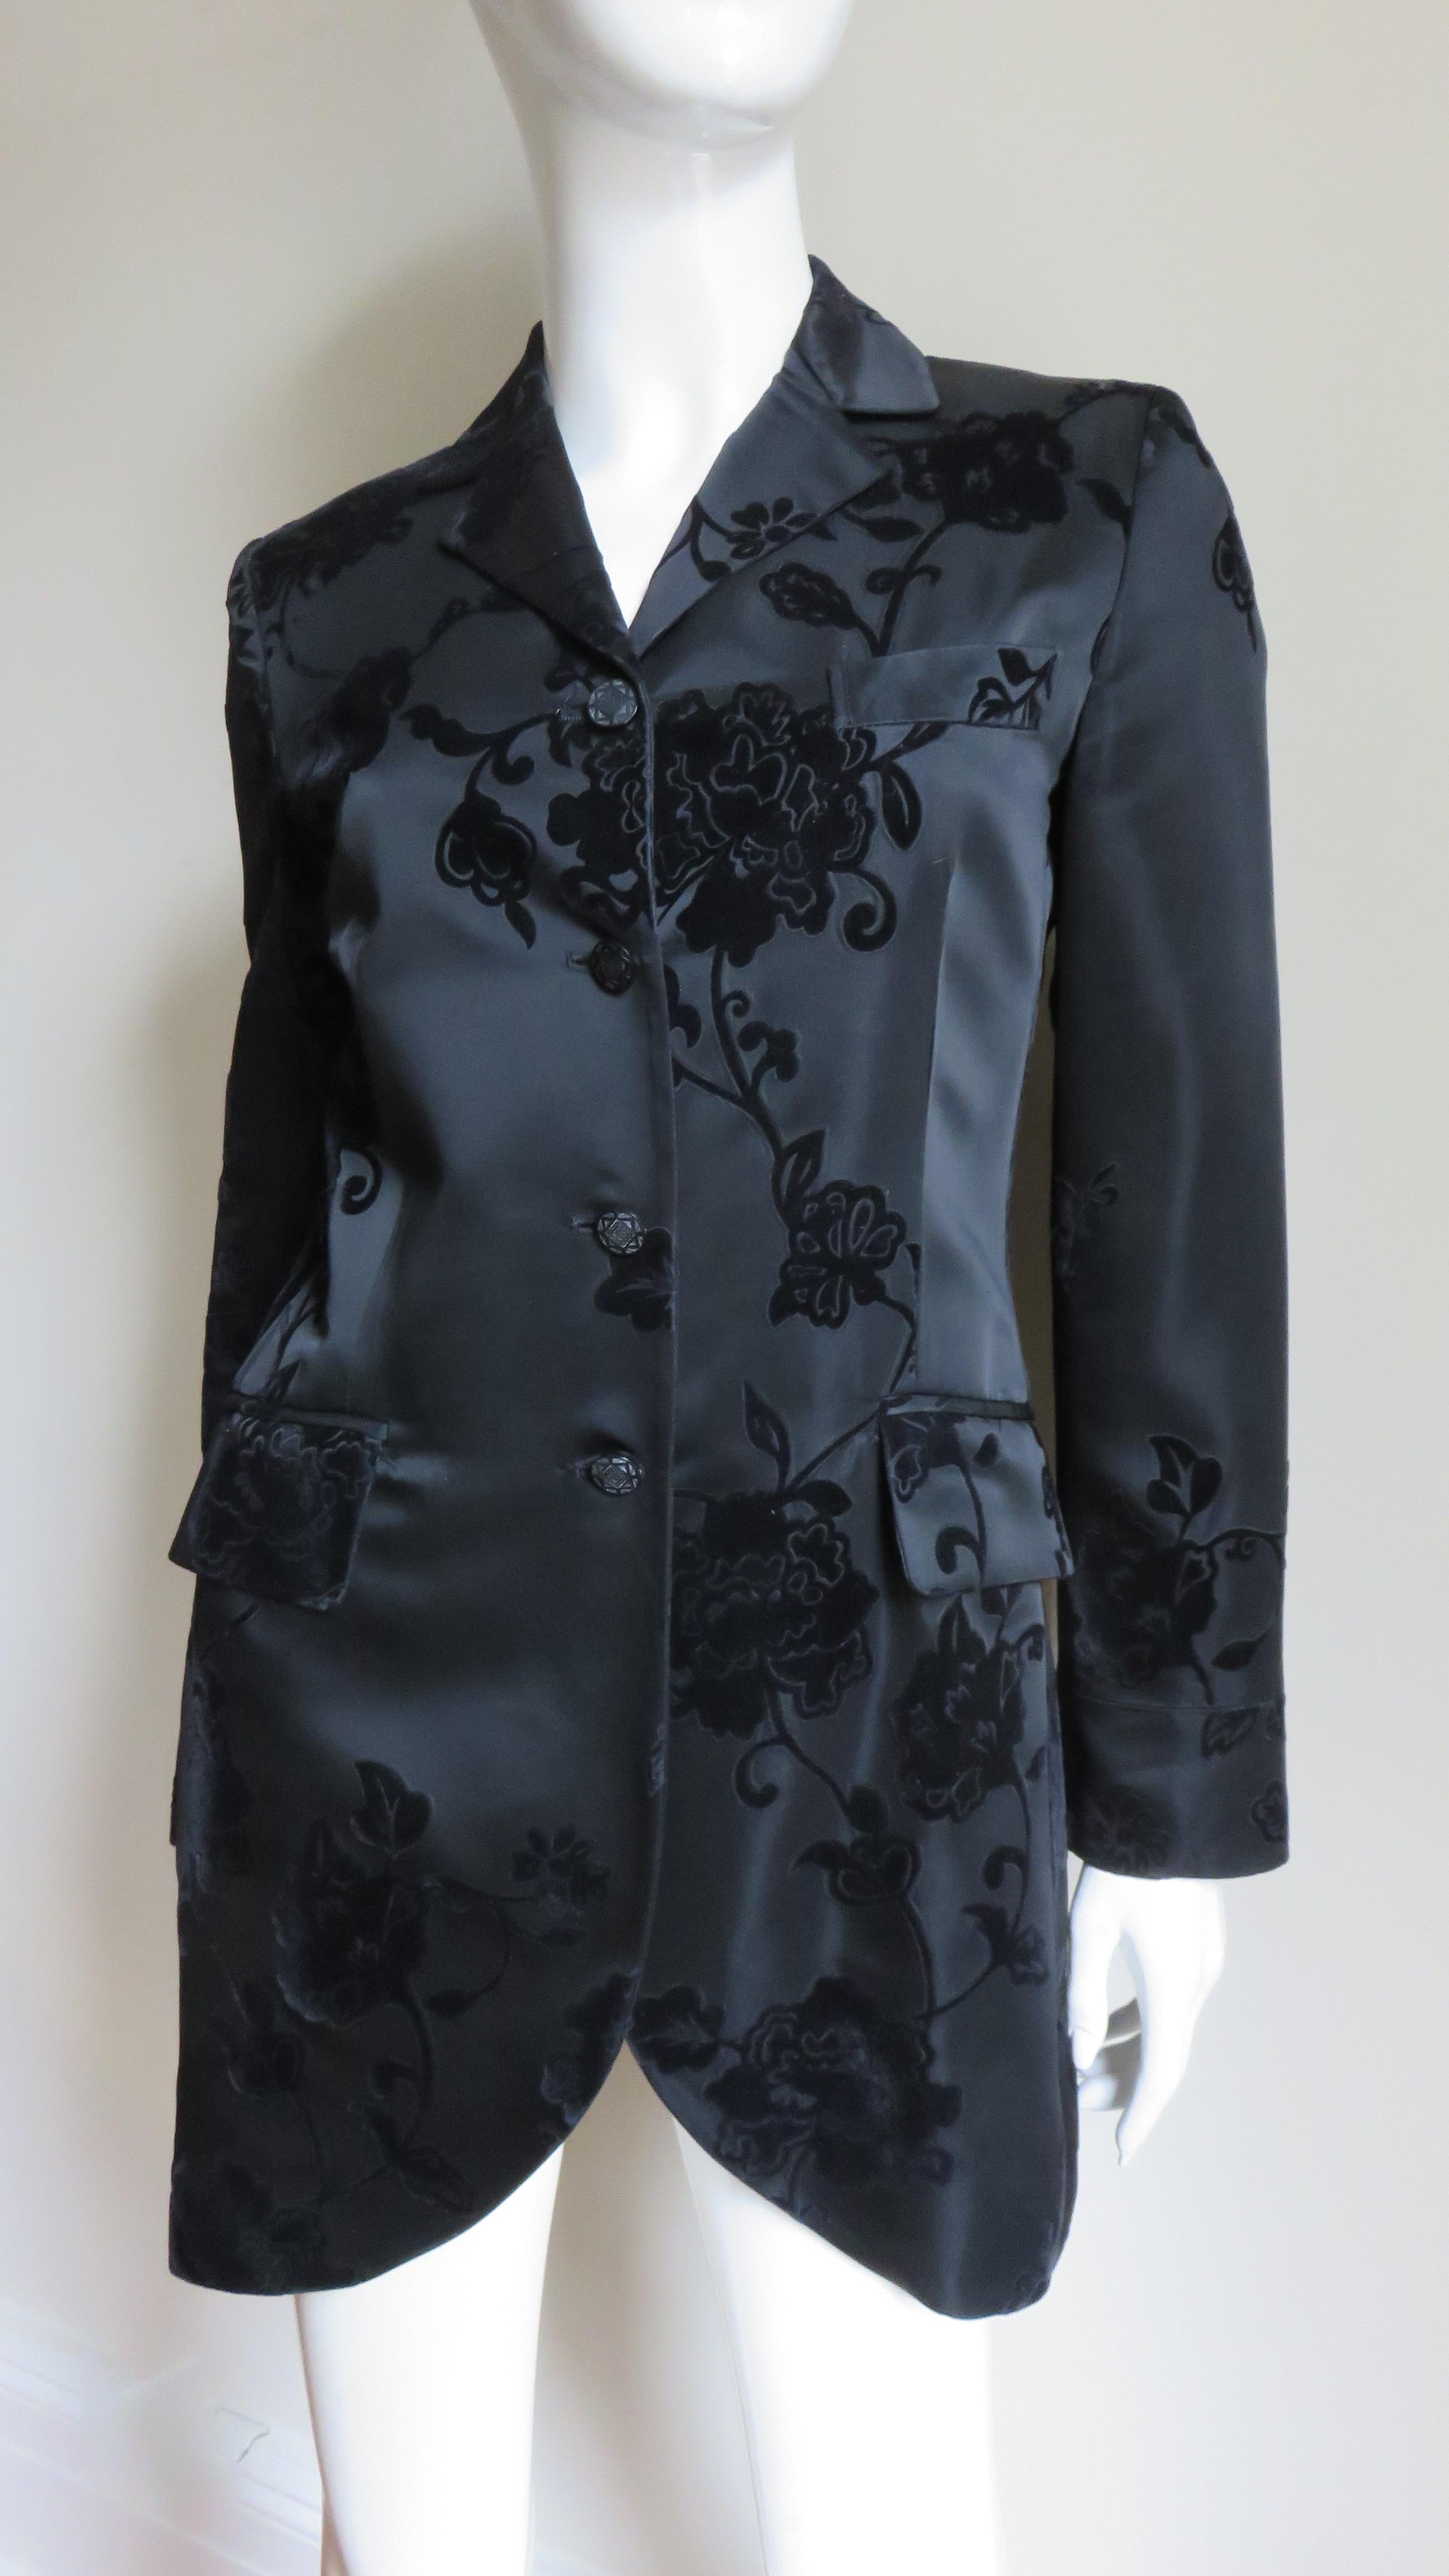 A beautiful black silk long single breasted jacket flocked with elaborate black velvet flowers by Alberta Ferretti.  It has a lapel collar, front button closure, button cuffs and 2 hip flap pockets.  It is fully lined in black silk.
Fits sizes